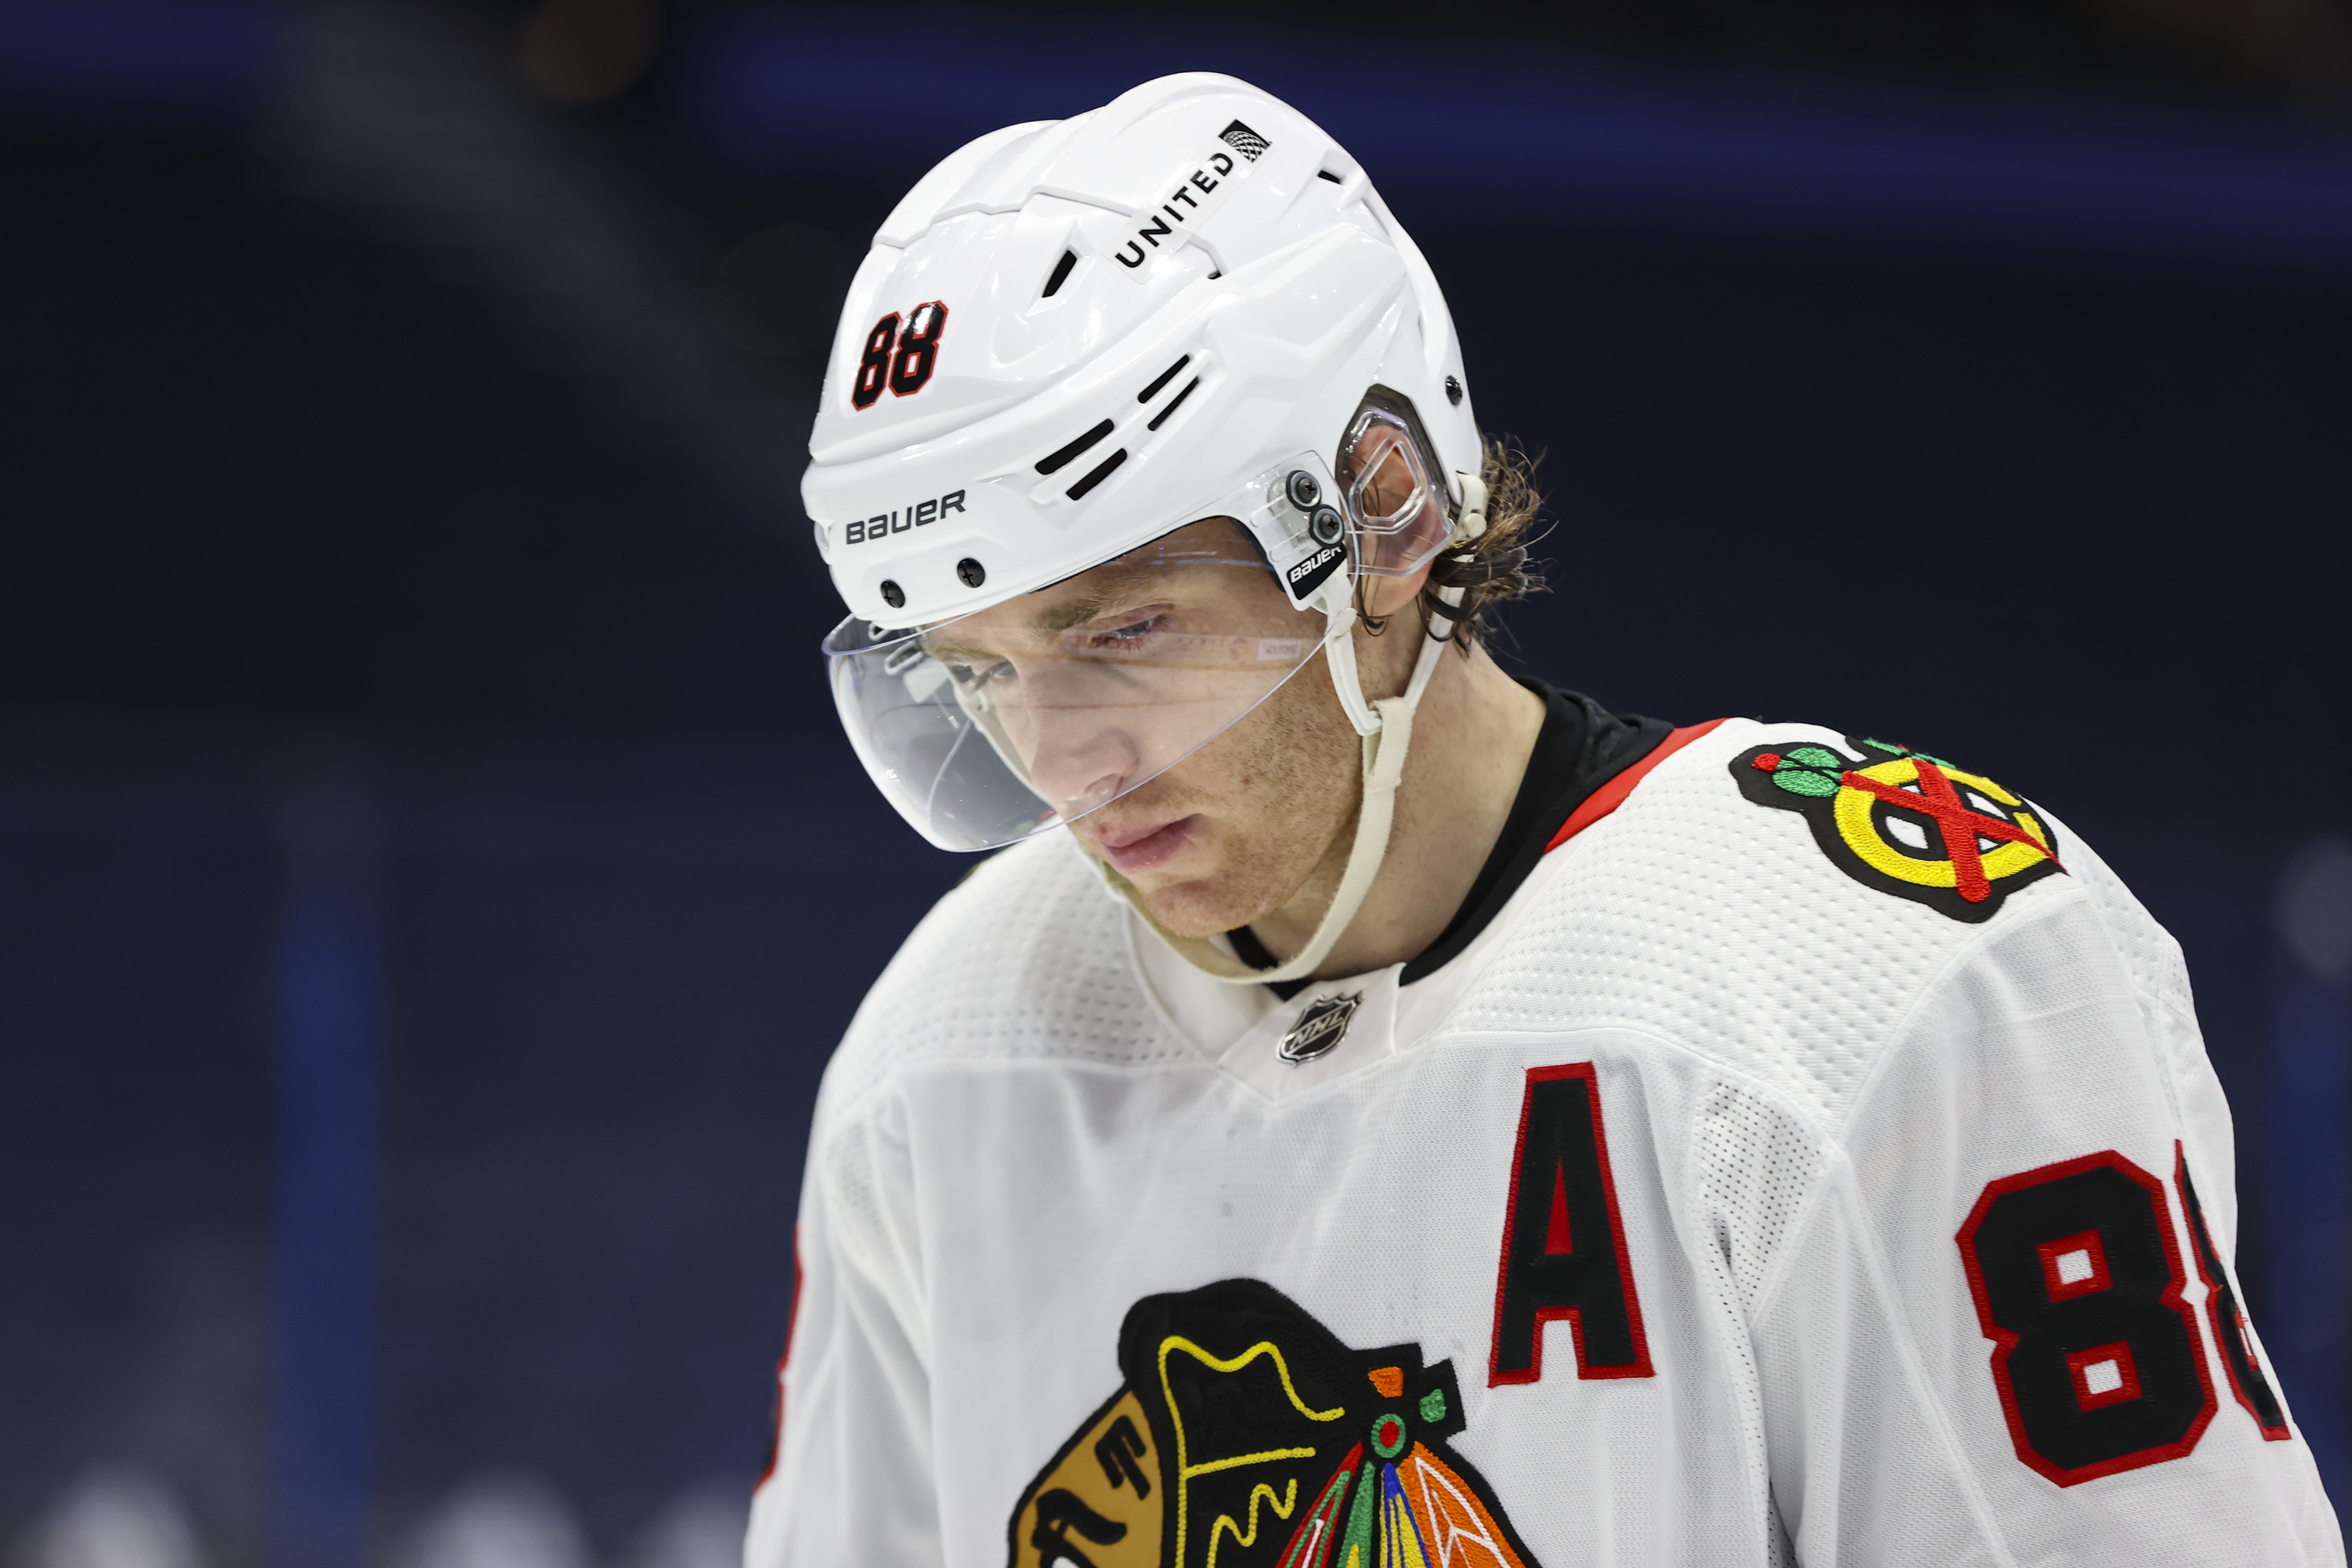 Stanley Cup Champ Patrick Kane Beat Up a 62-Year-Old Cabbie Over 20 Cents